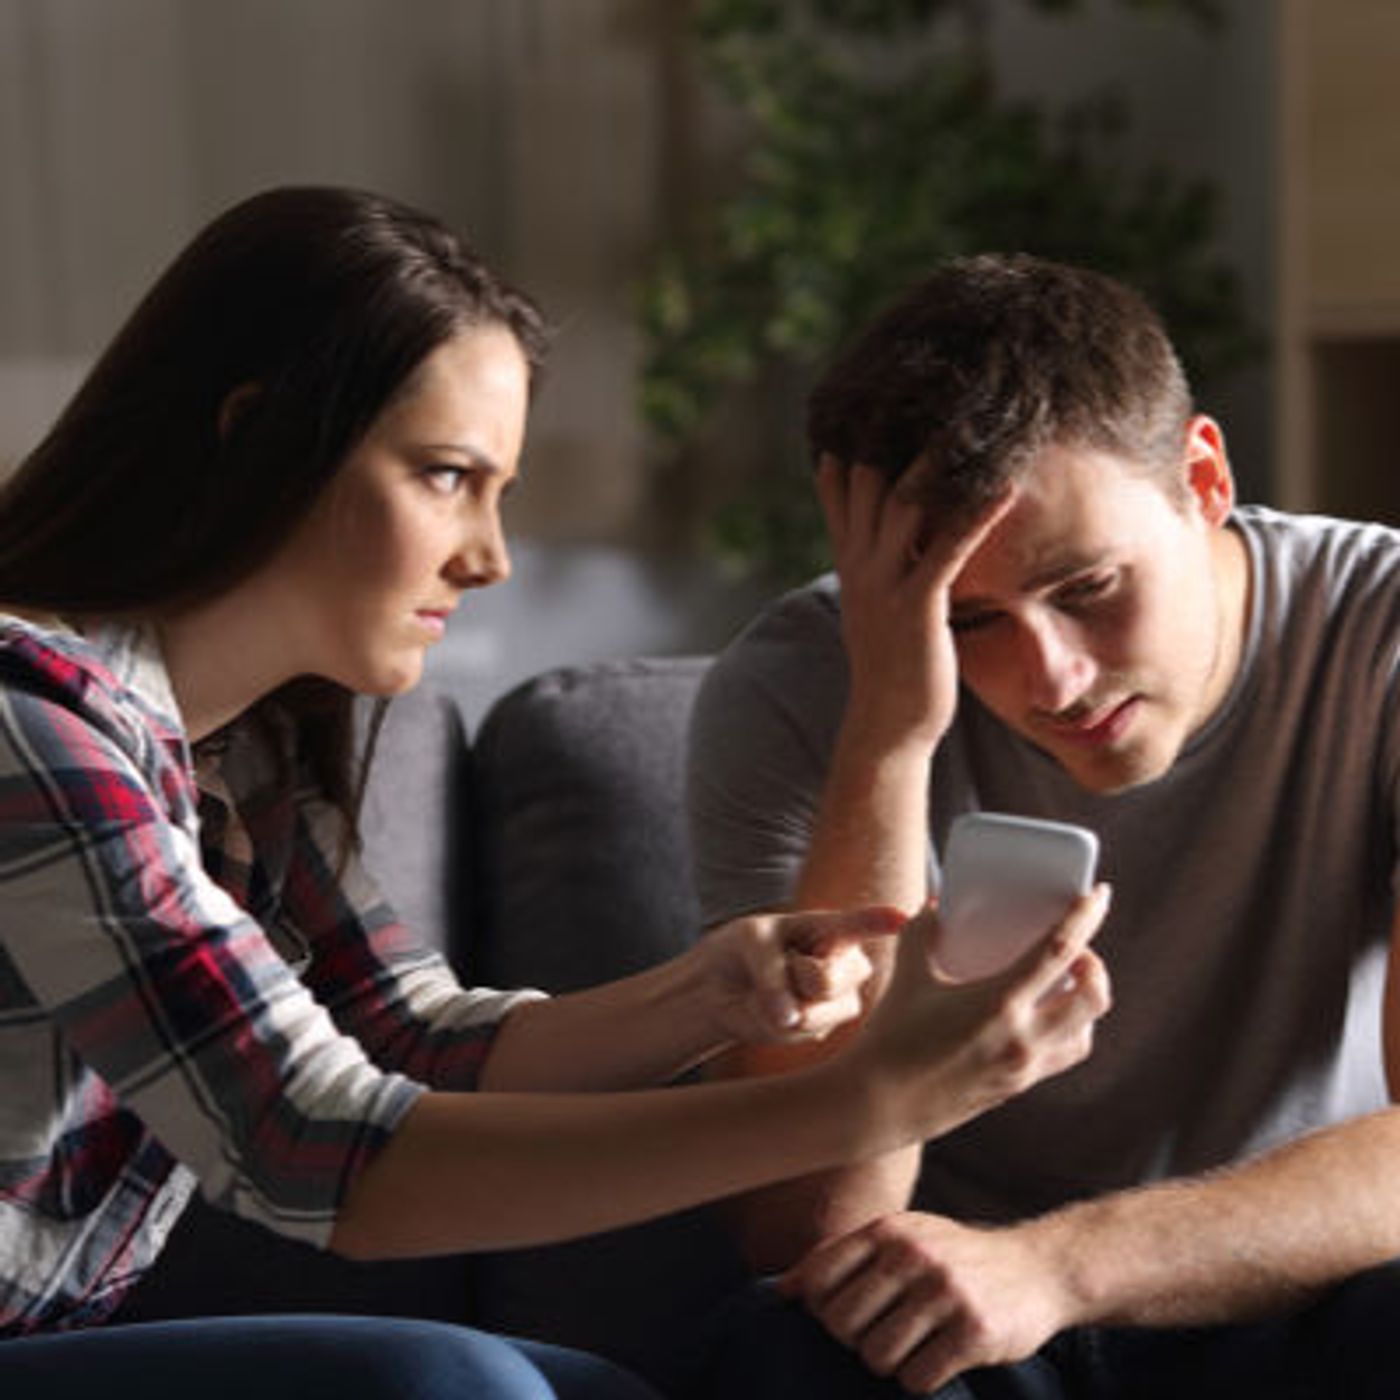 Conversations About Divorce - When You Discover Your Spouse Is Unfaithful